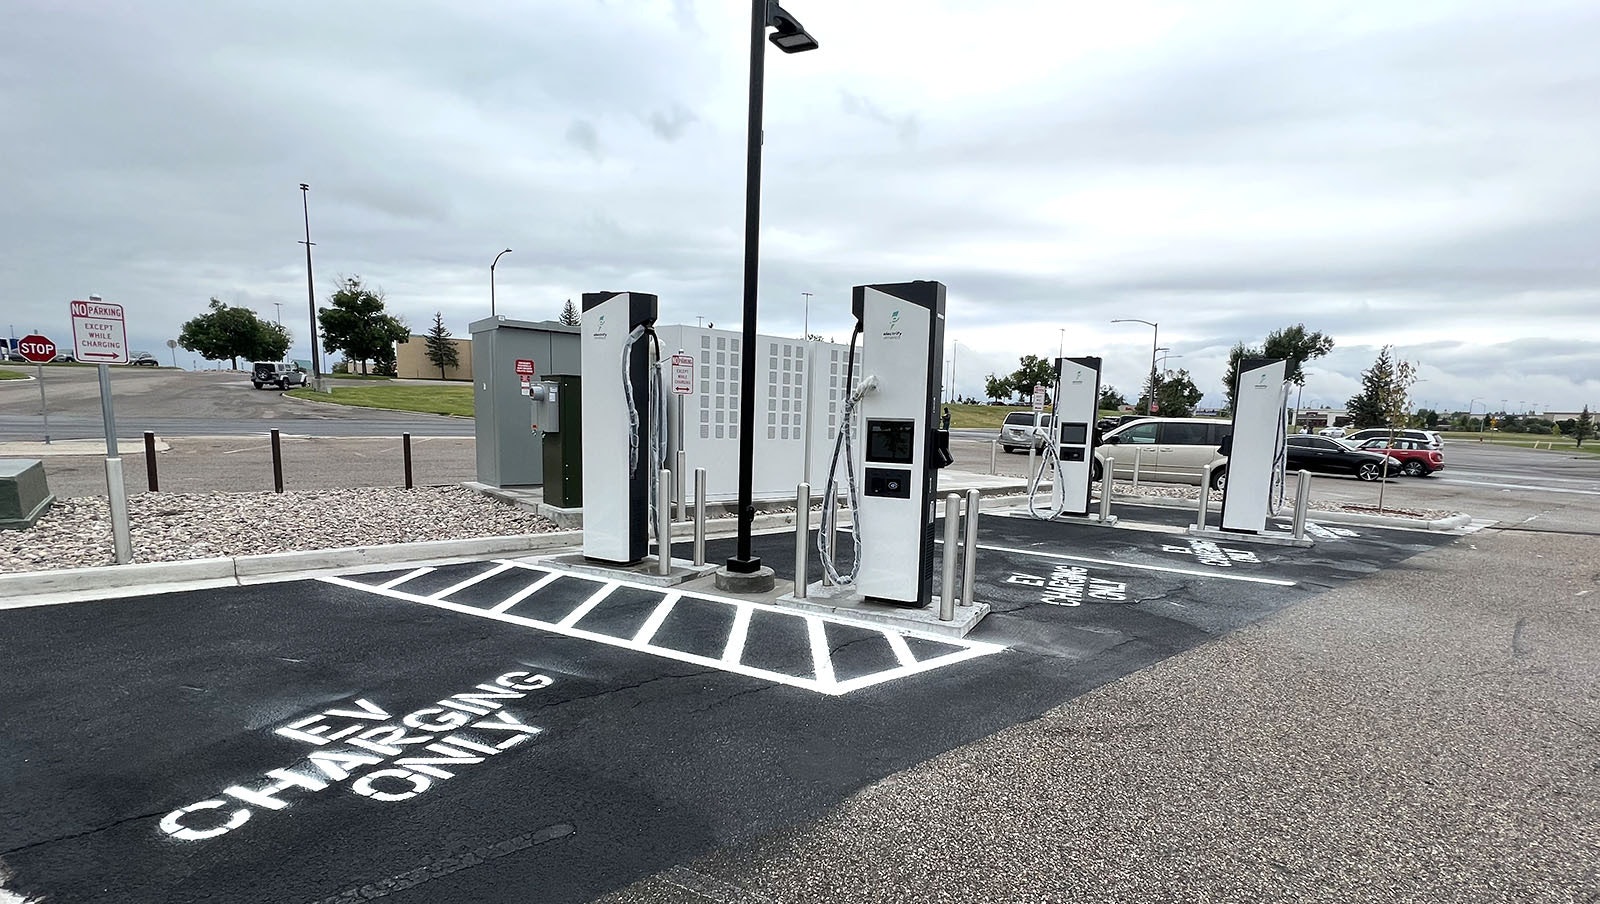 A new Electrify America charging station in the parking lot of the Target store in Cheyenne is expected to open next month.